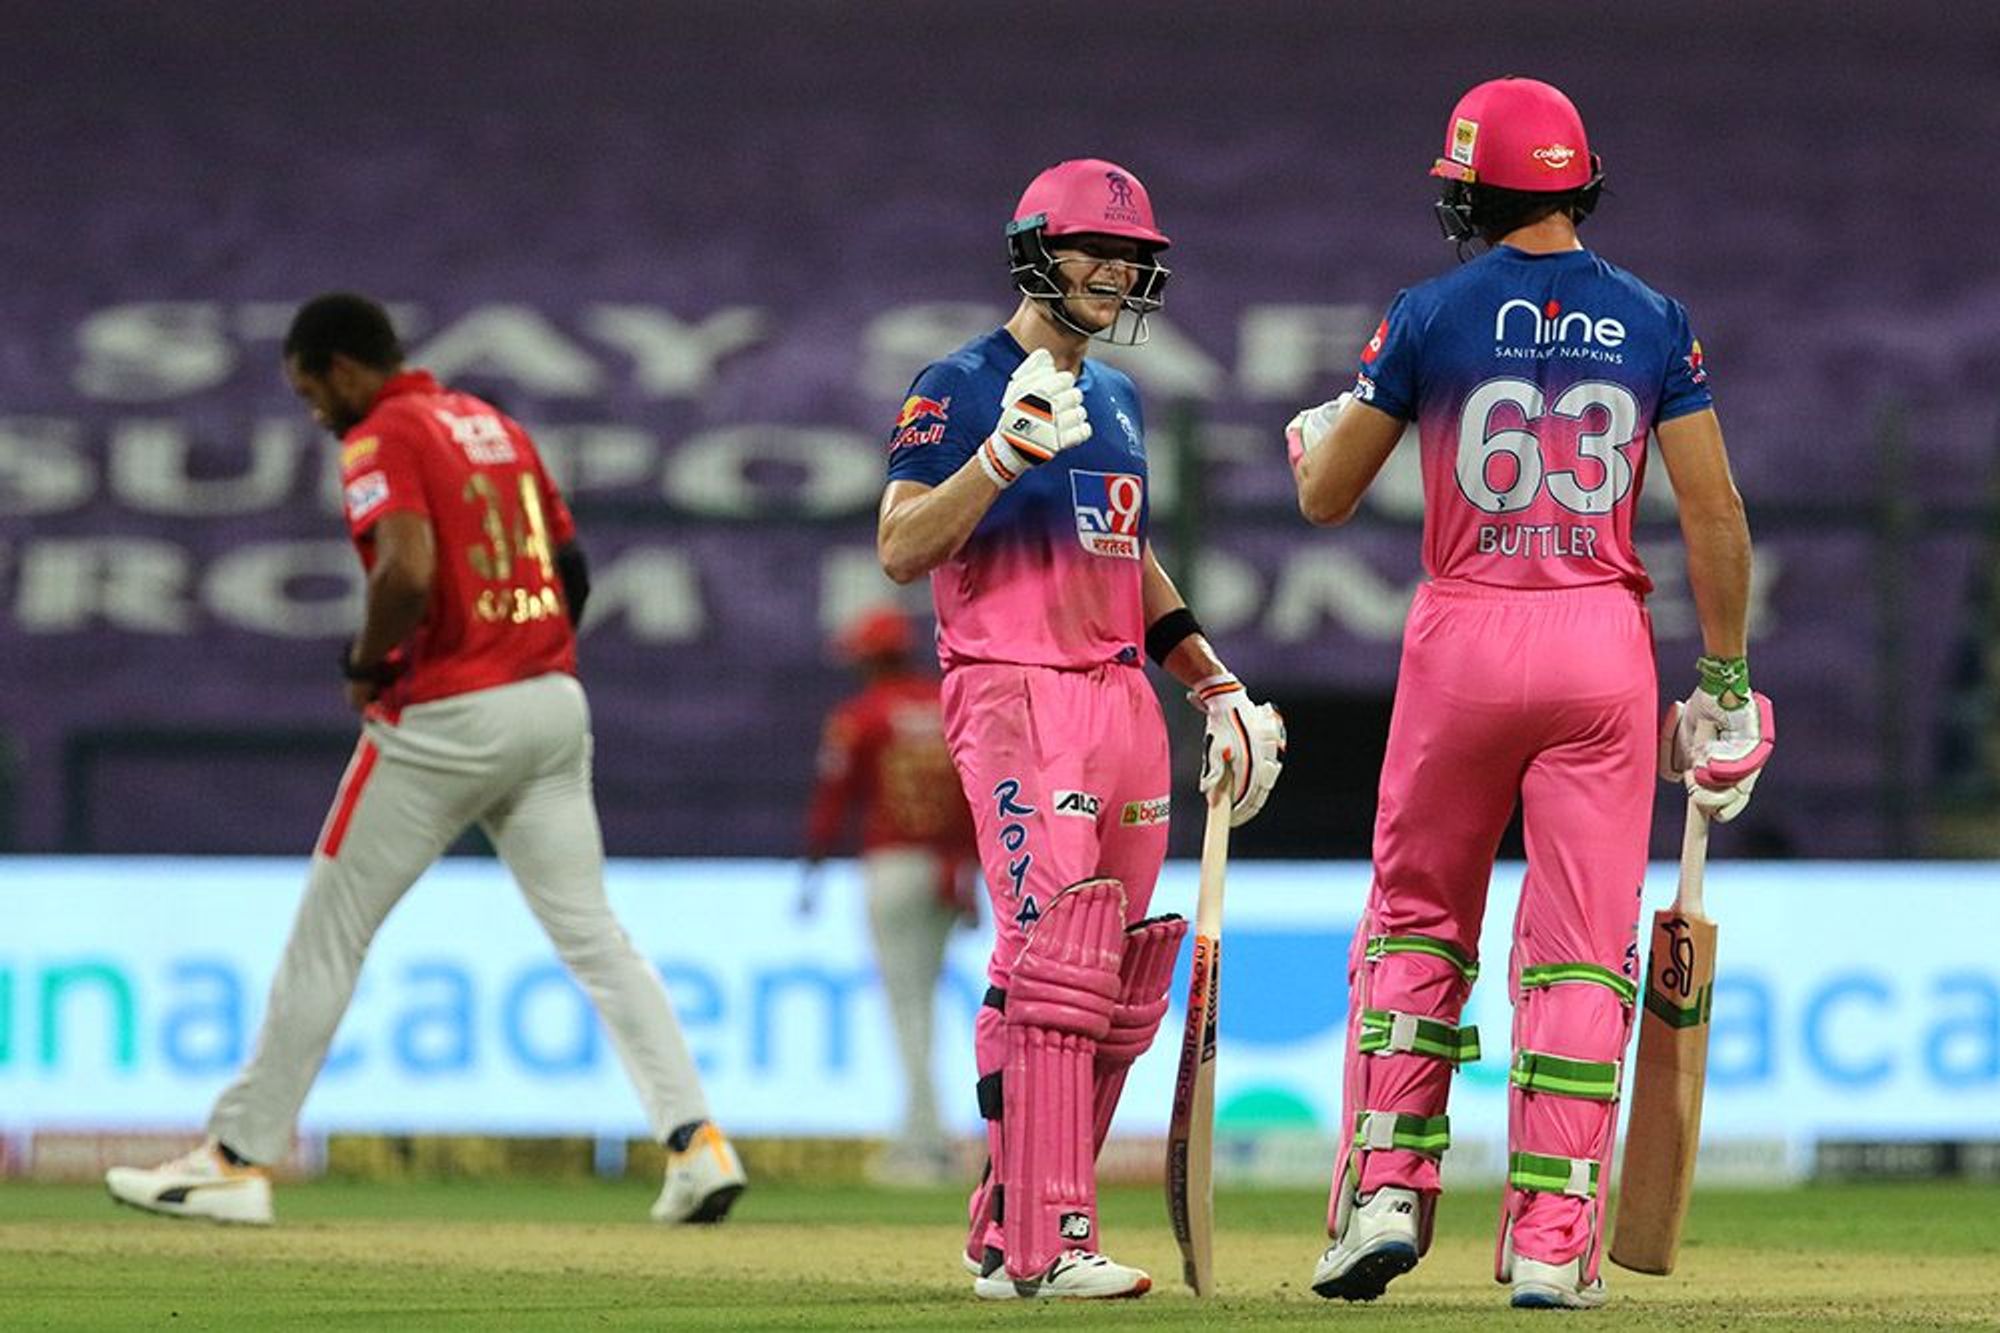 IPL 2020: RR cruise to 7 wicket win against KXIP